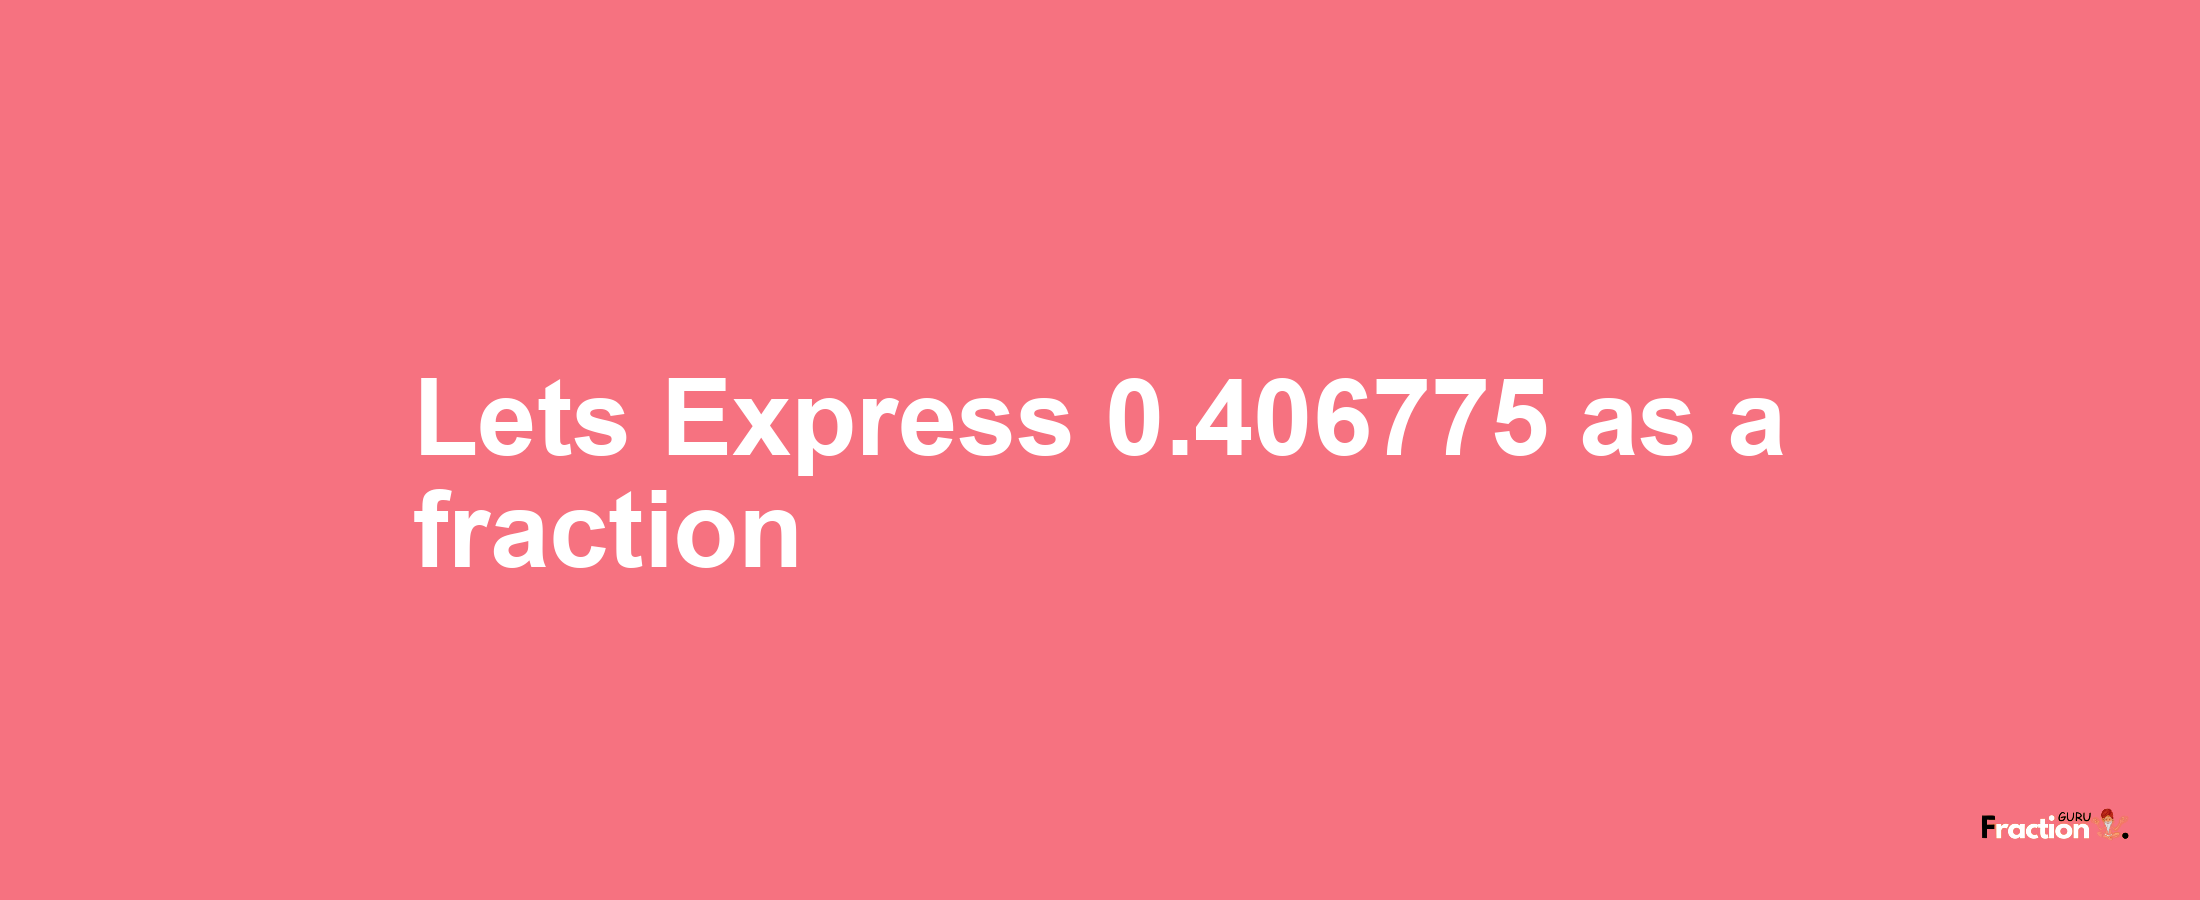 Lets Express 0.406775 as afraction